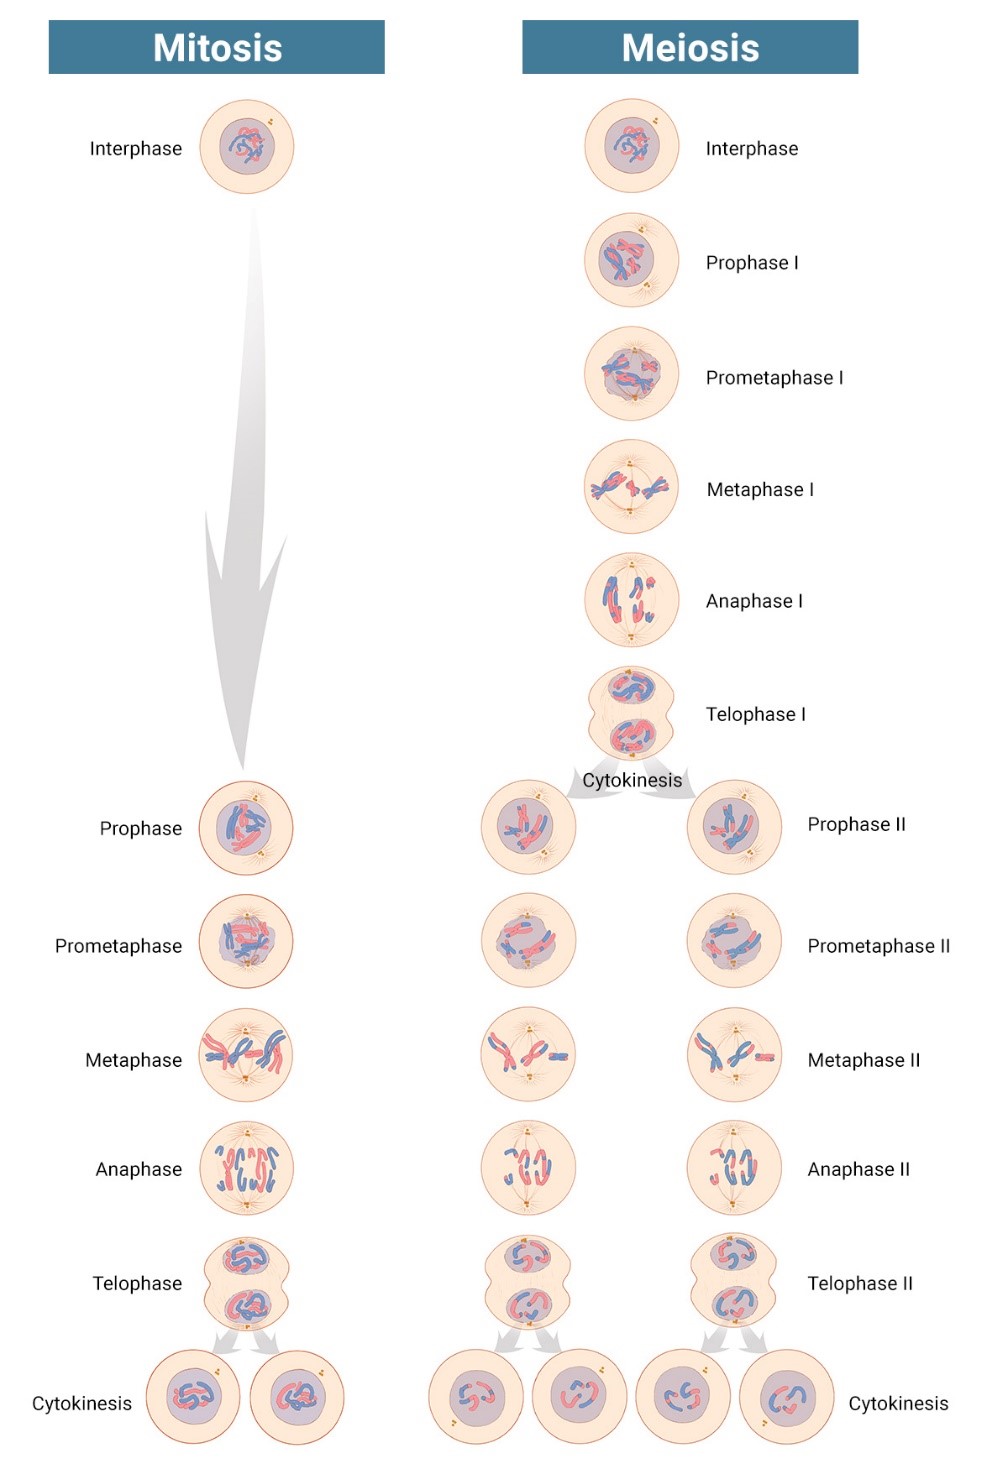 On the left, a cell goes through the stages of mitosis to split into two cells that each have two sets of chromosomes. On the right, a cell goes through the phases of meiosis to divide into four cells that each have a single set of chromosomes.